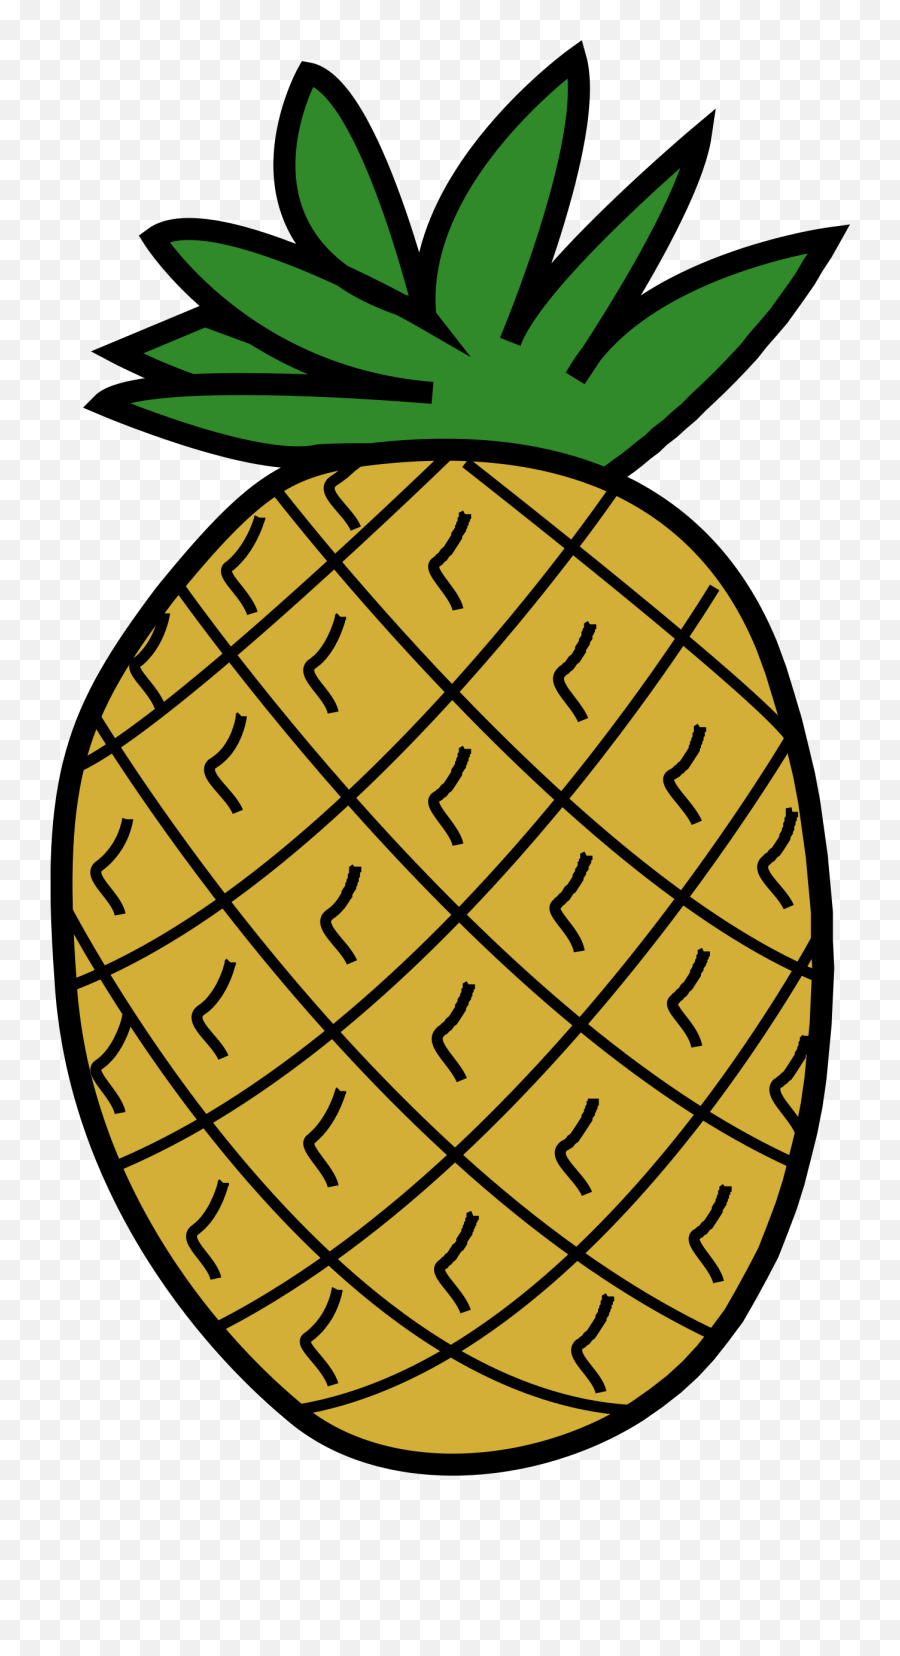 Pineapple Clipart Transparent Png Image - Pine Apple In Clip Art Emoji,Pineapple Clipart